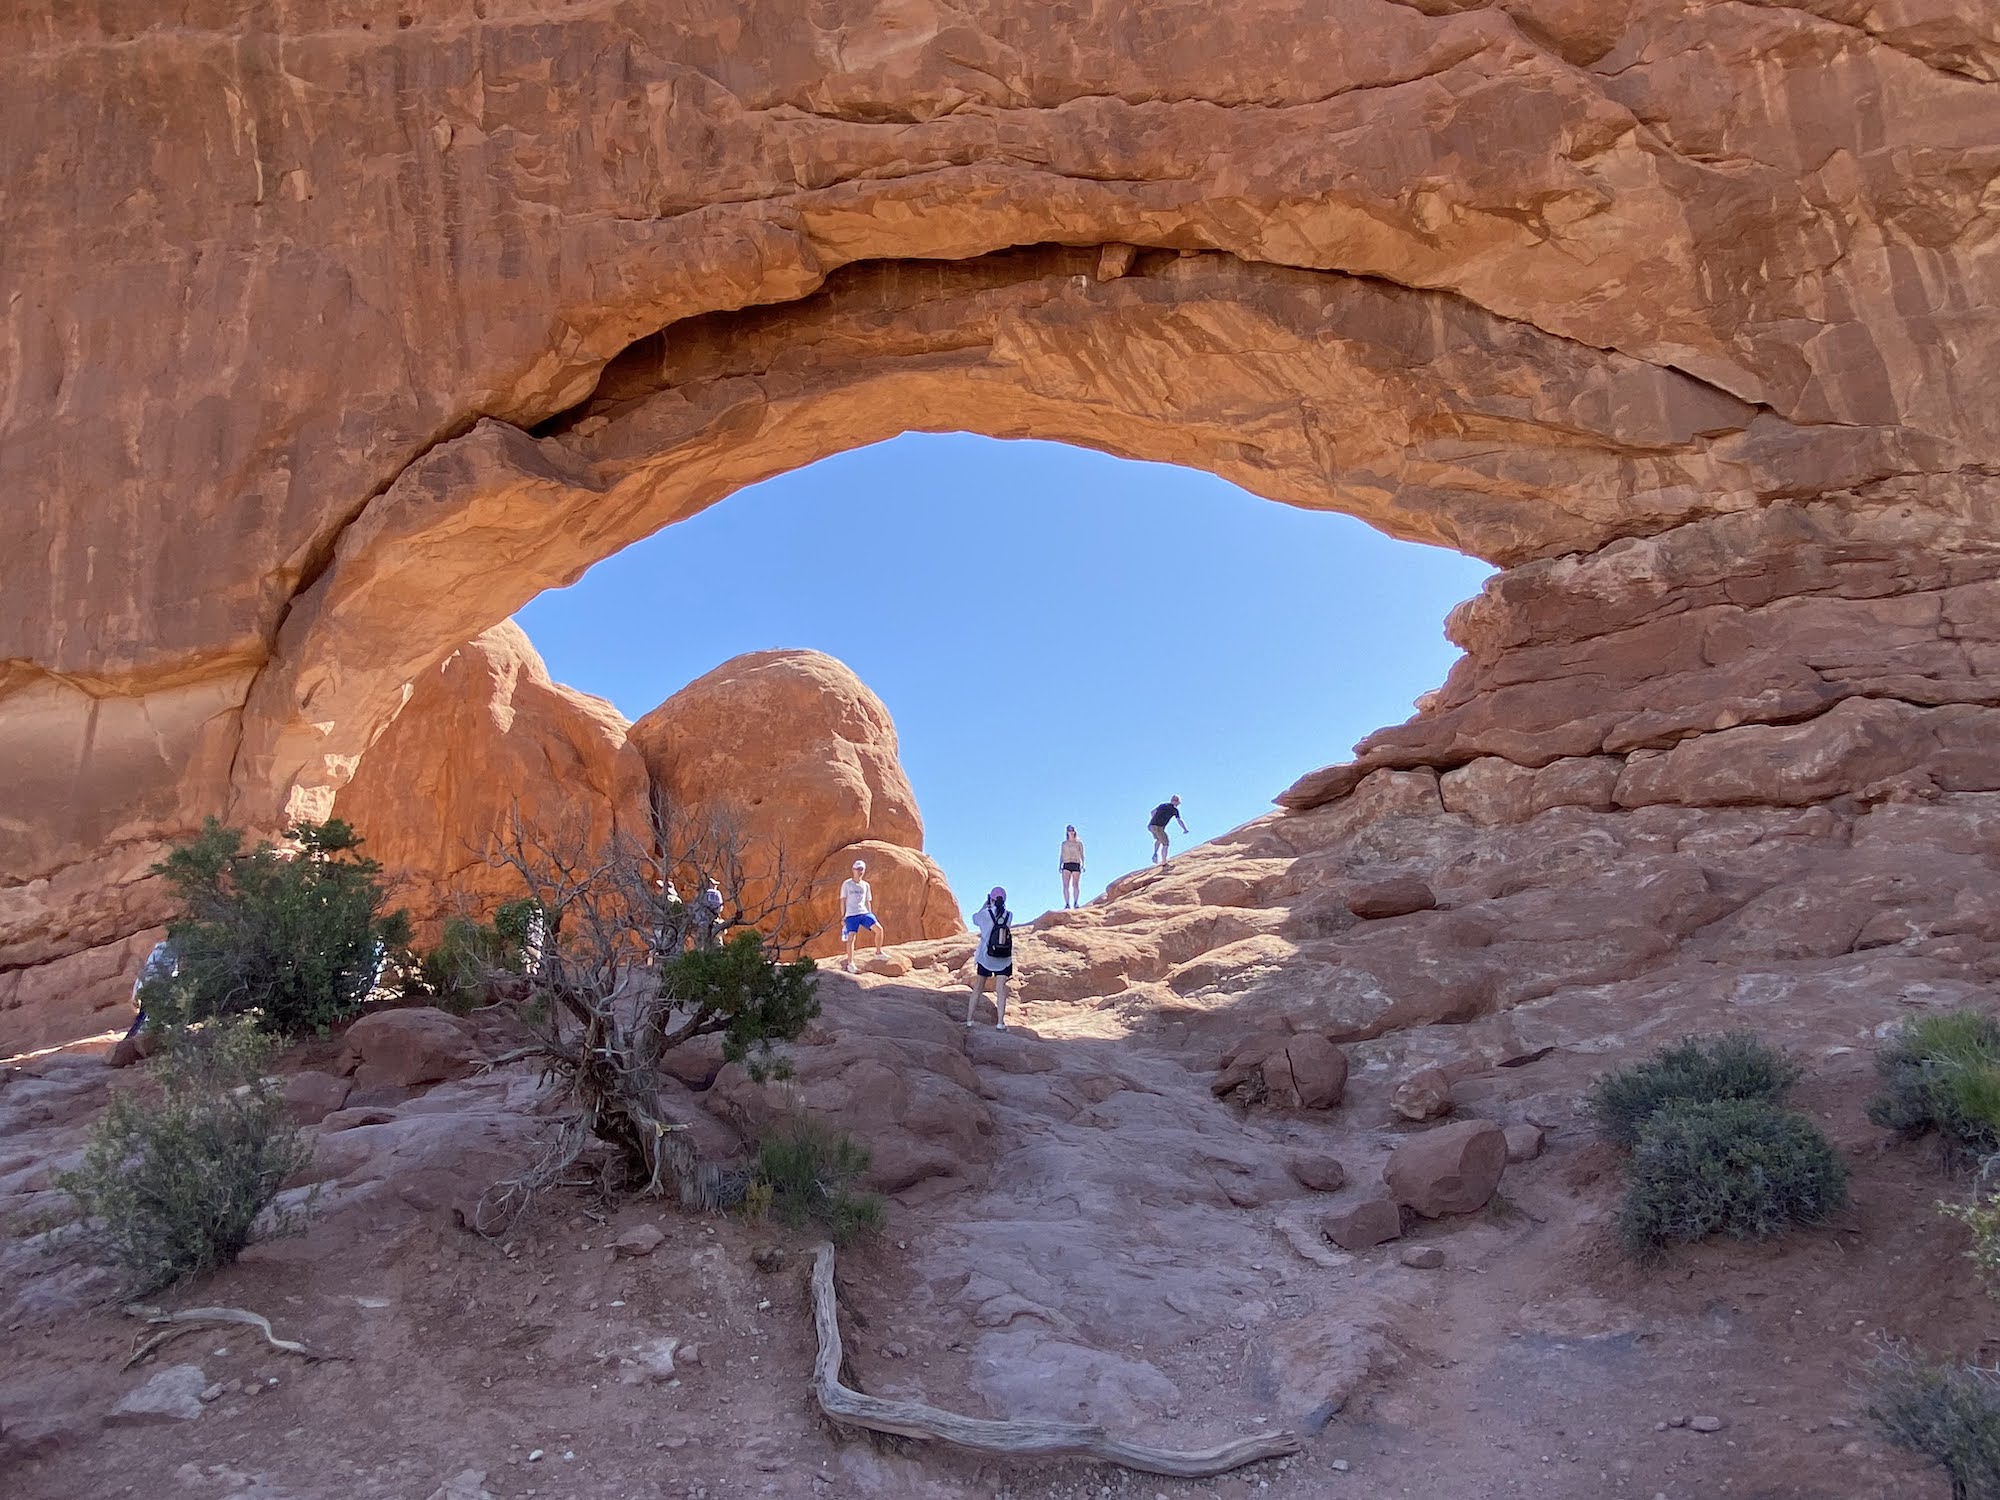 An arch of red sandstone